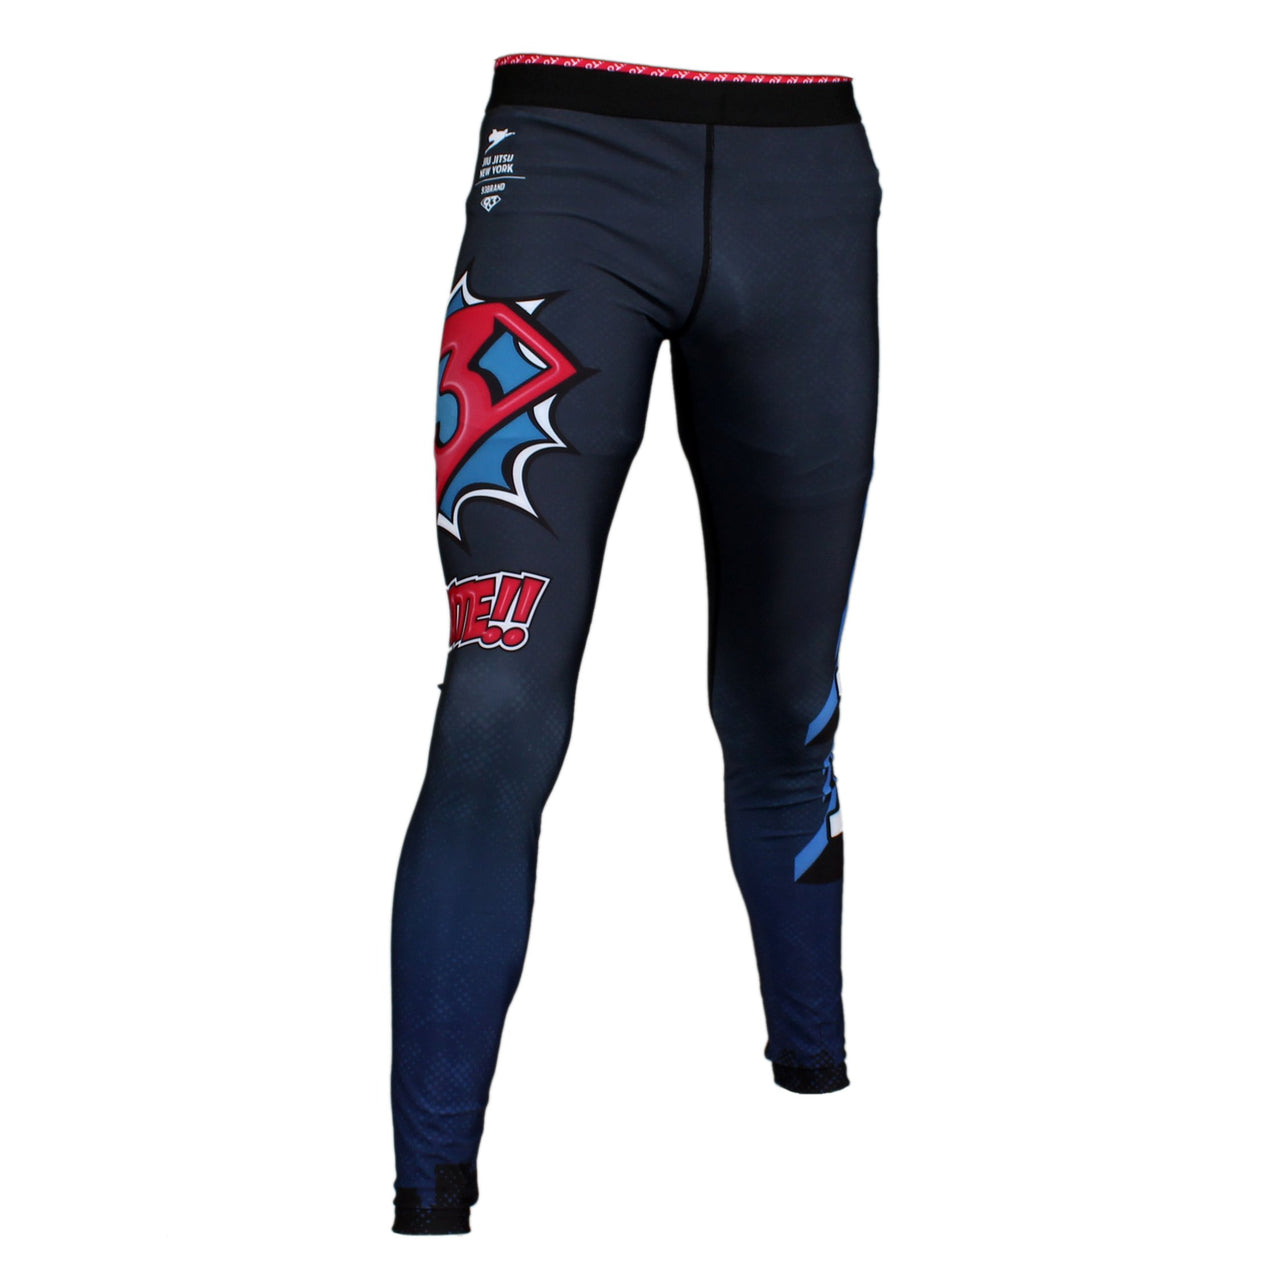 93brand "Combate" Grappling Spats